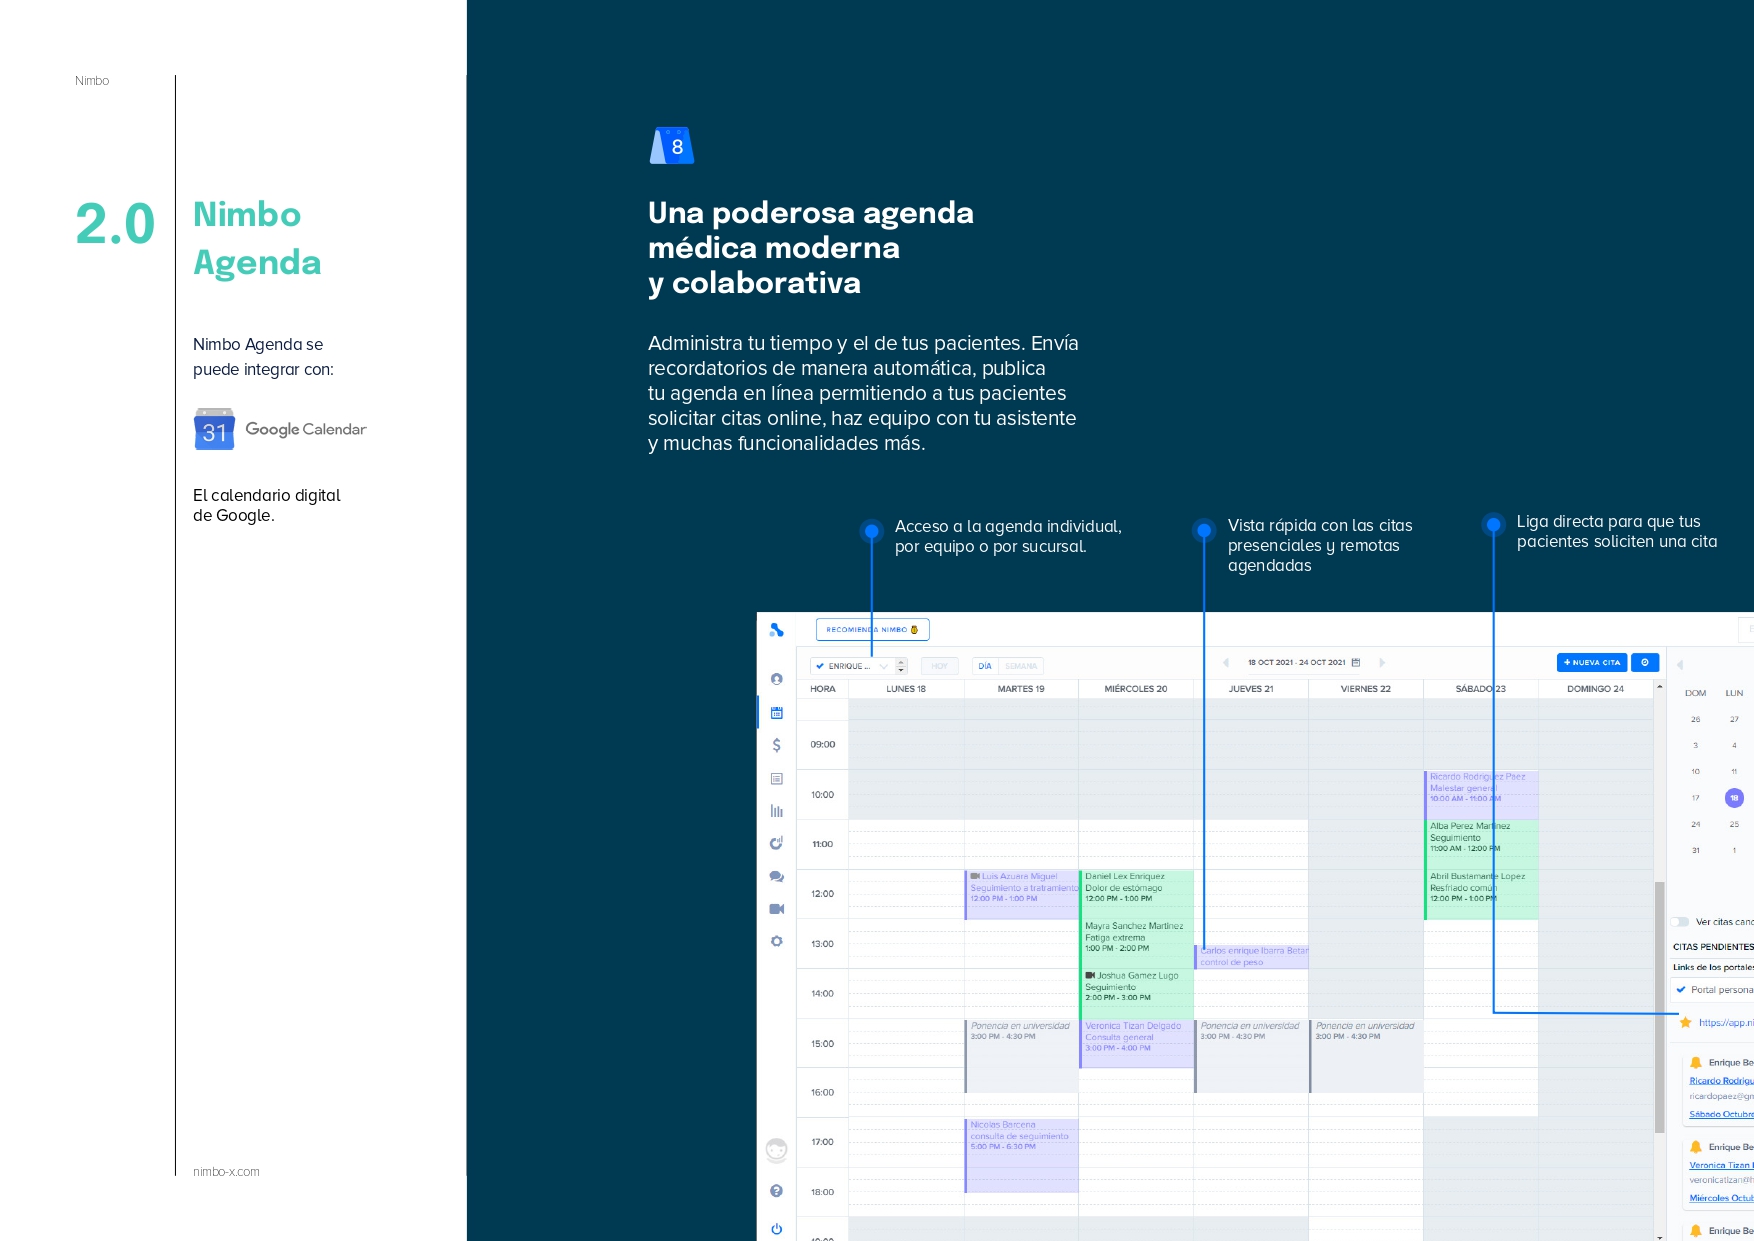 A powerful, modern, and collaborative medical agenda Nimbo Agenda can be integrated with your Google Calendar account.